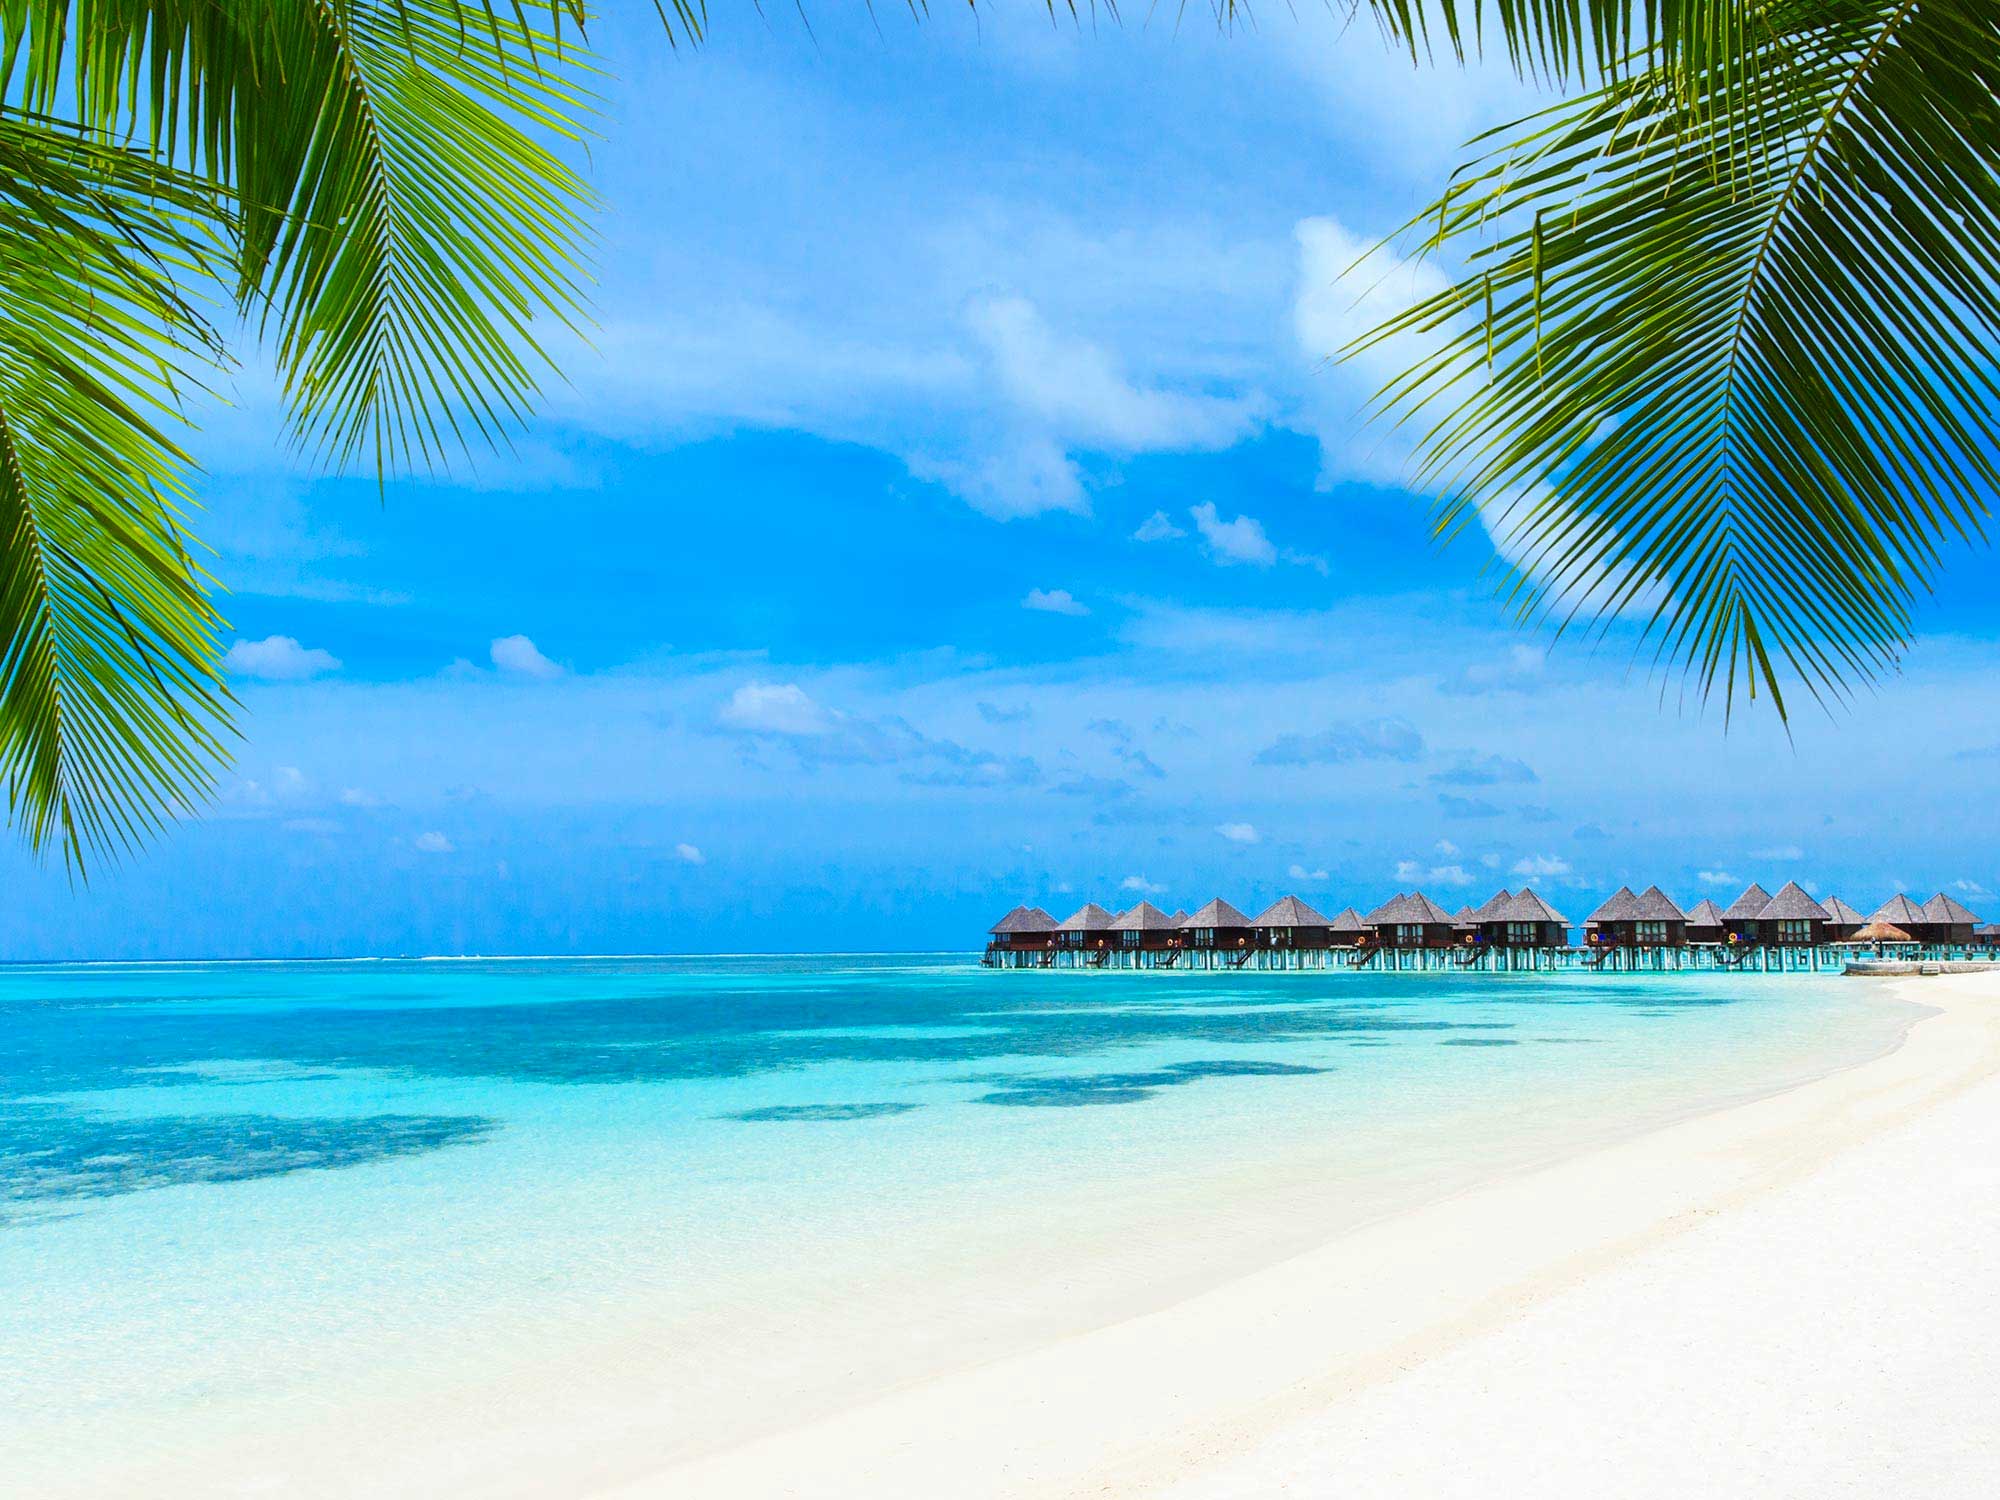 Maldives beach with overwater bunglows